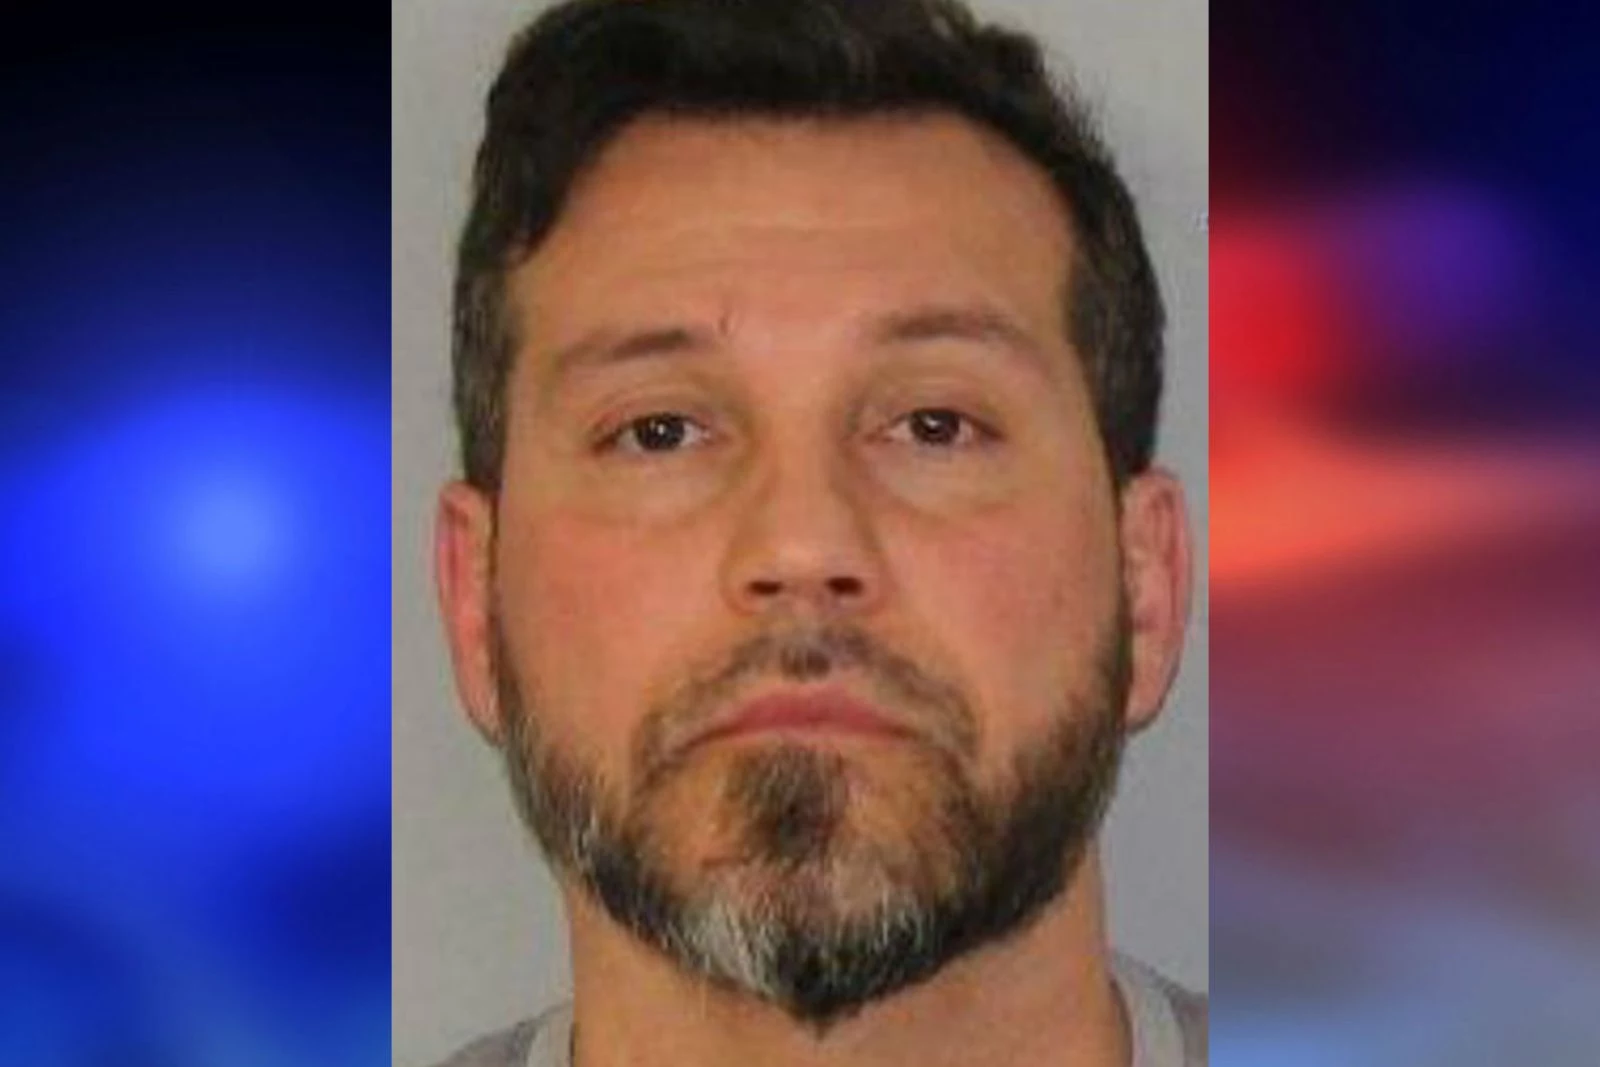 NJ gym teacher admits to sexually assaulting 2 teens, years apart